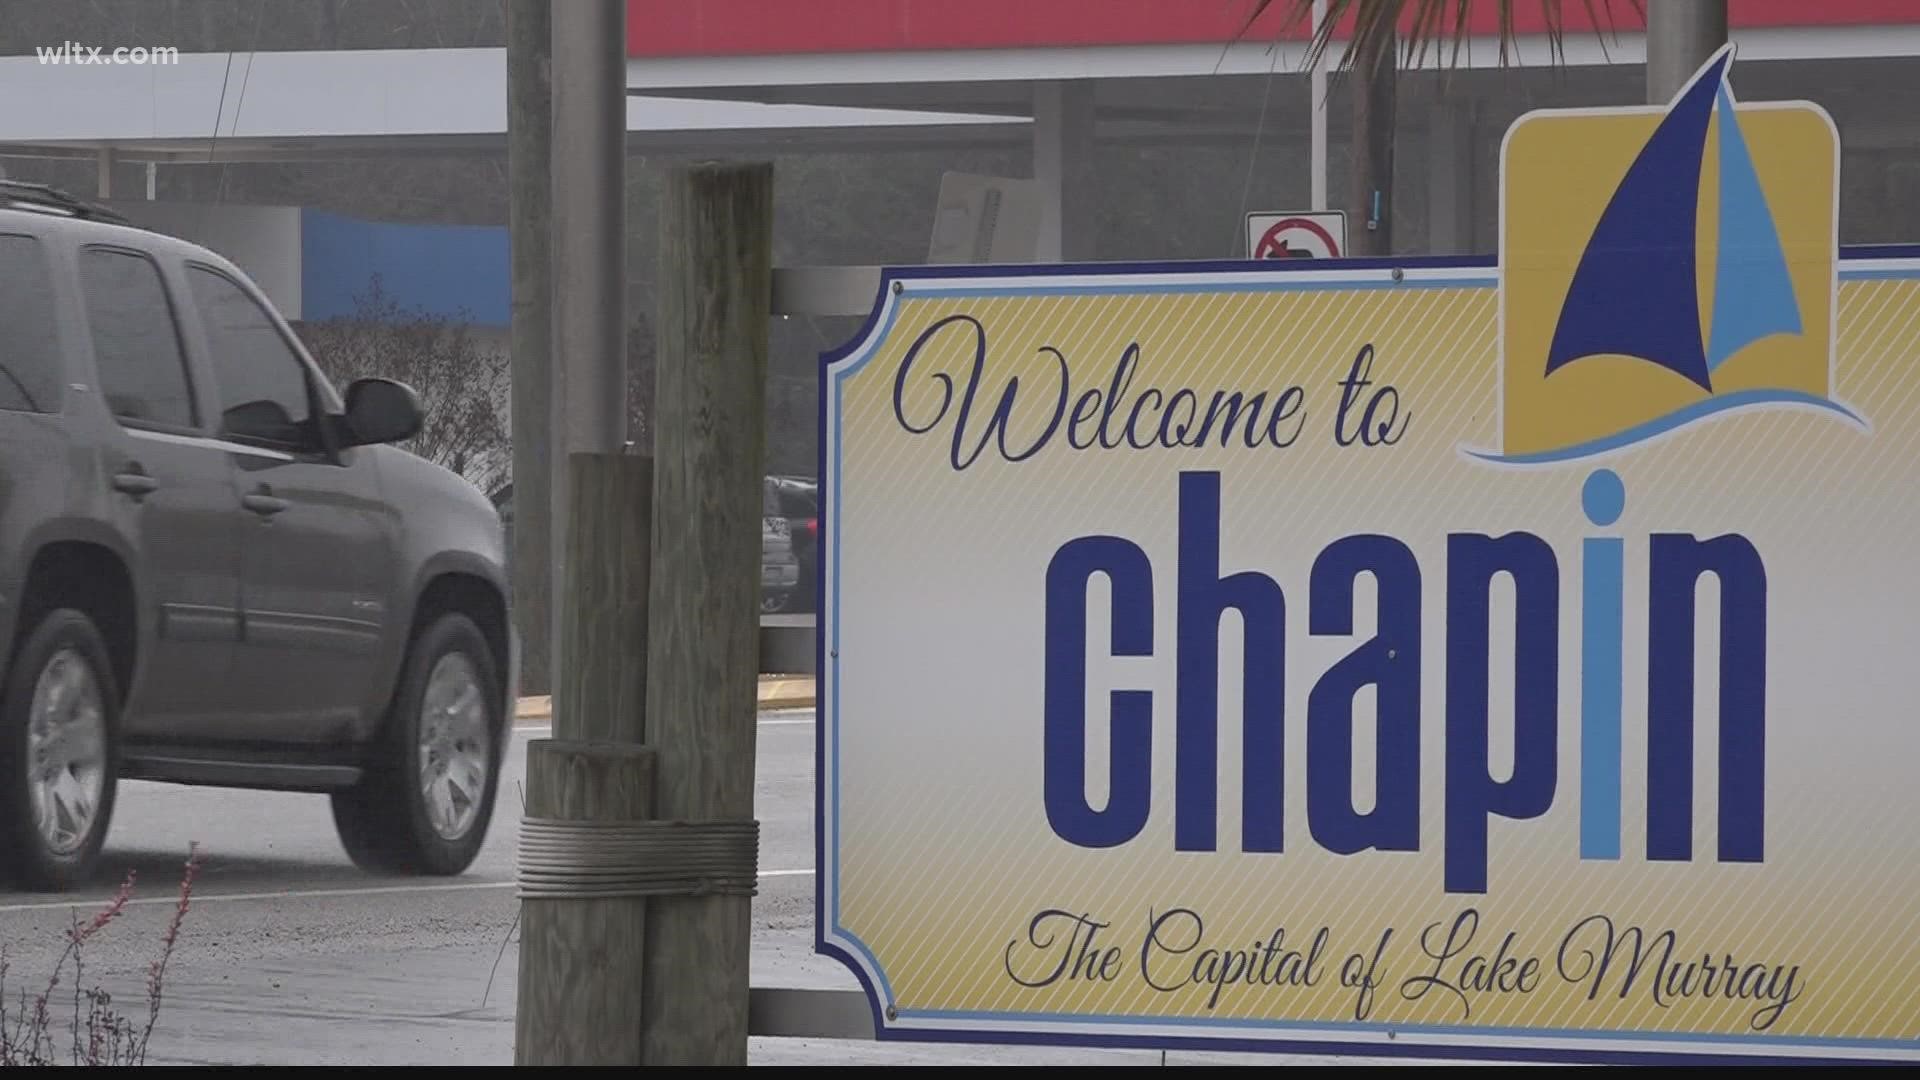 The Greater Chapin Community Foundation distributed more than $21,500 to area non-profits.